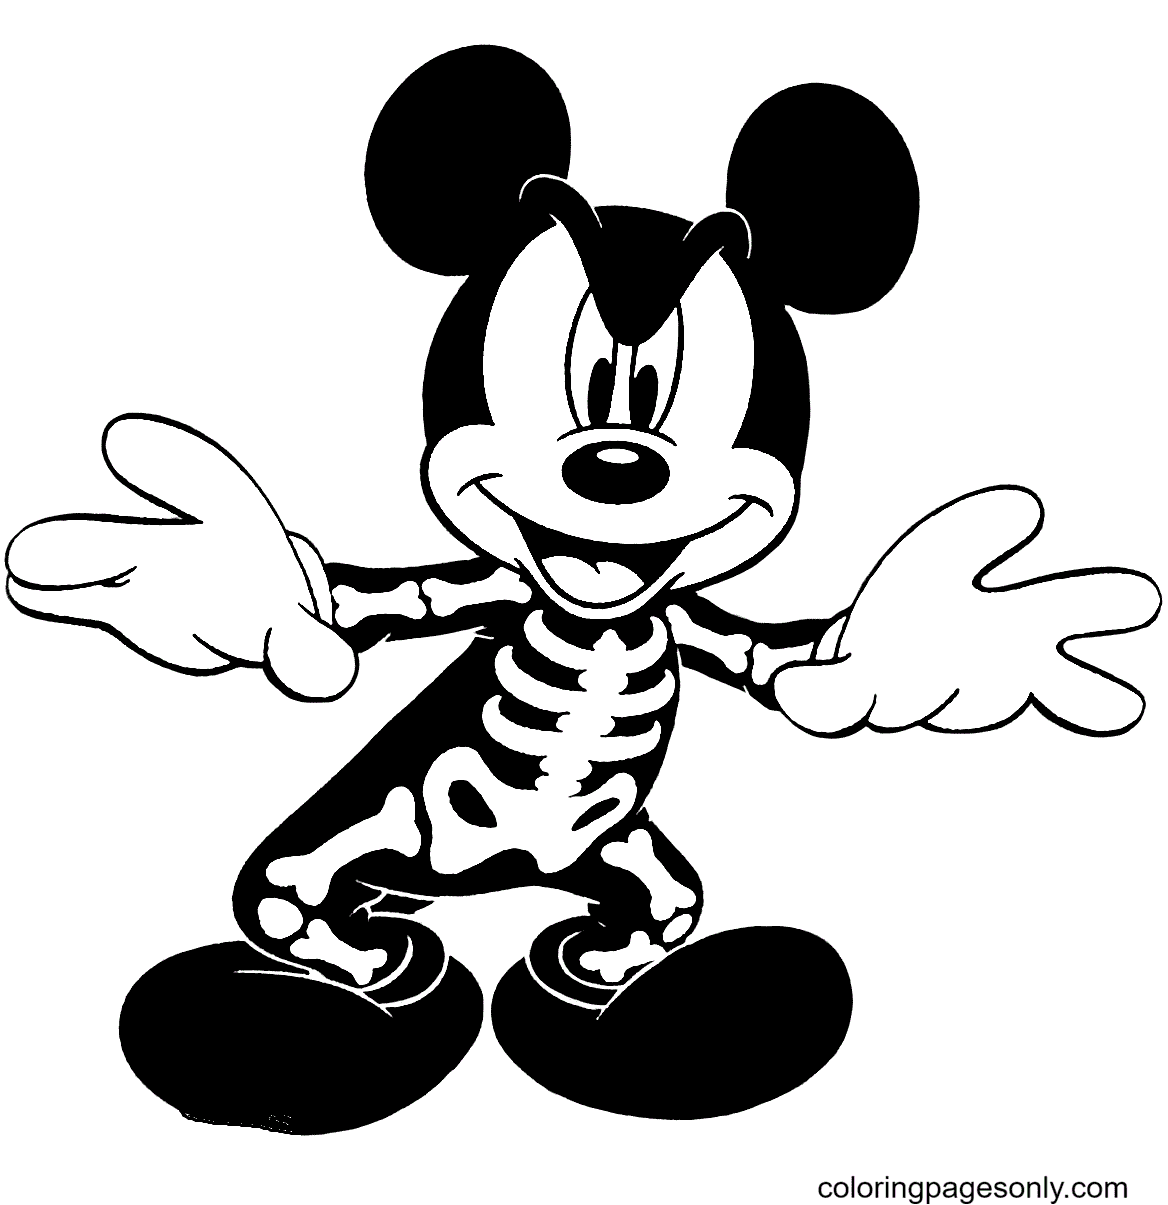 Mickey Mouse as a Skeleton Coloring Page